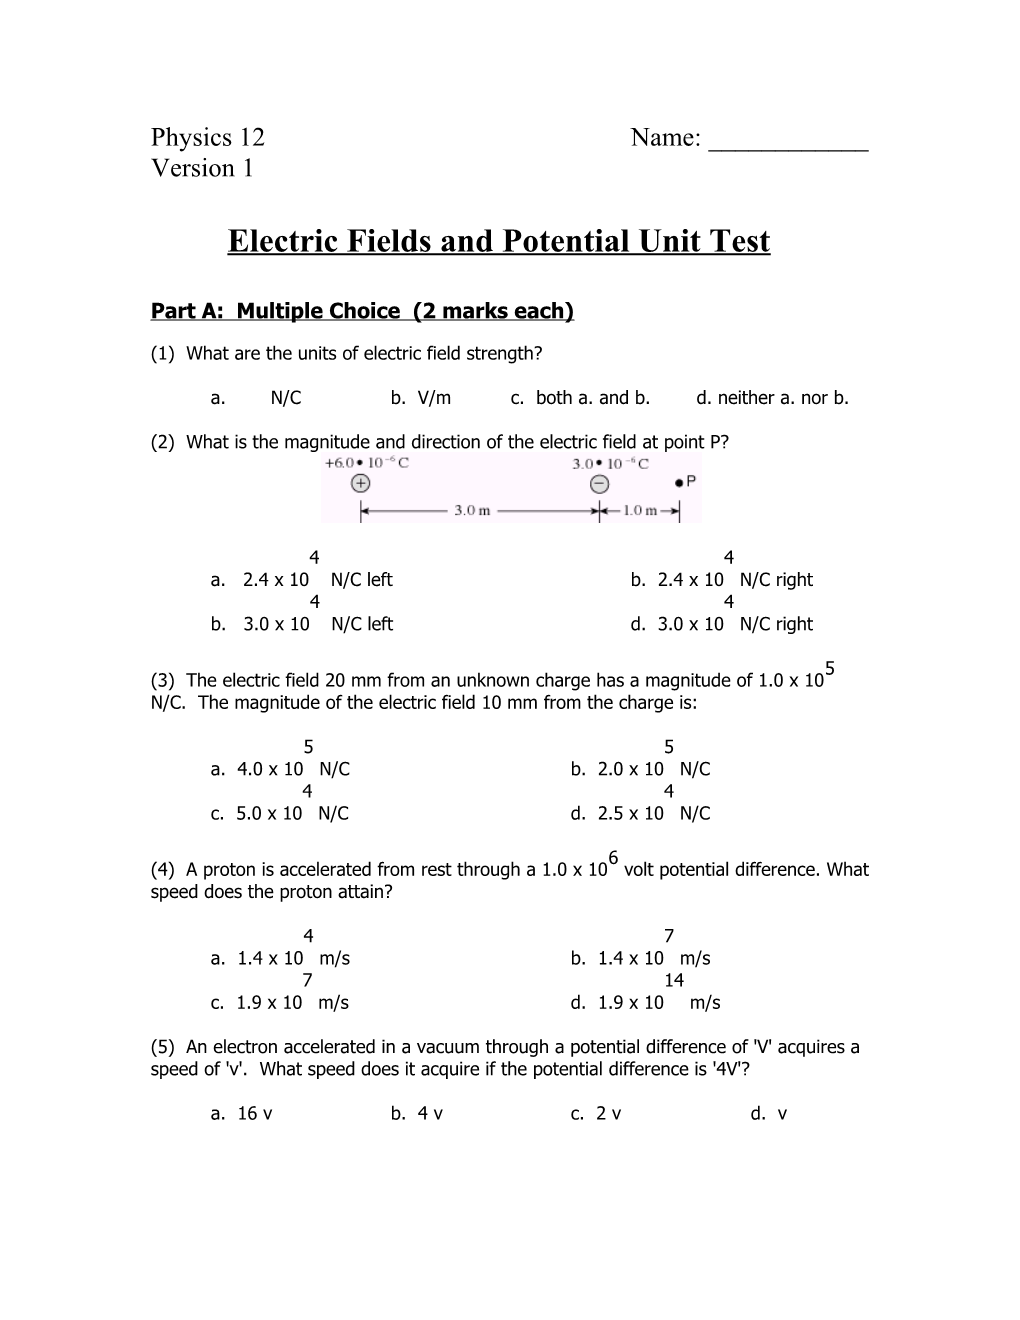 Electric Fields and Potential Unit Test